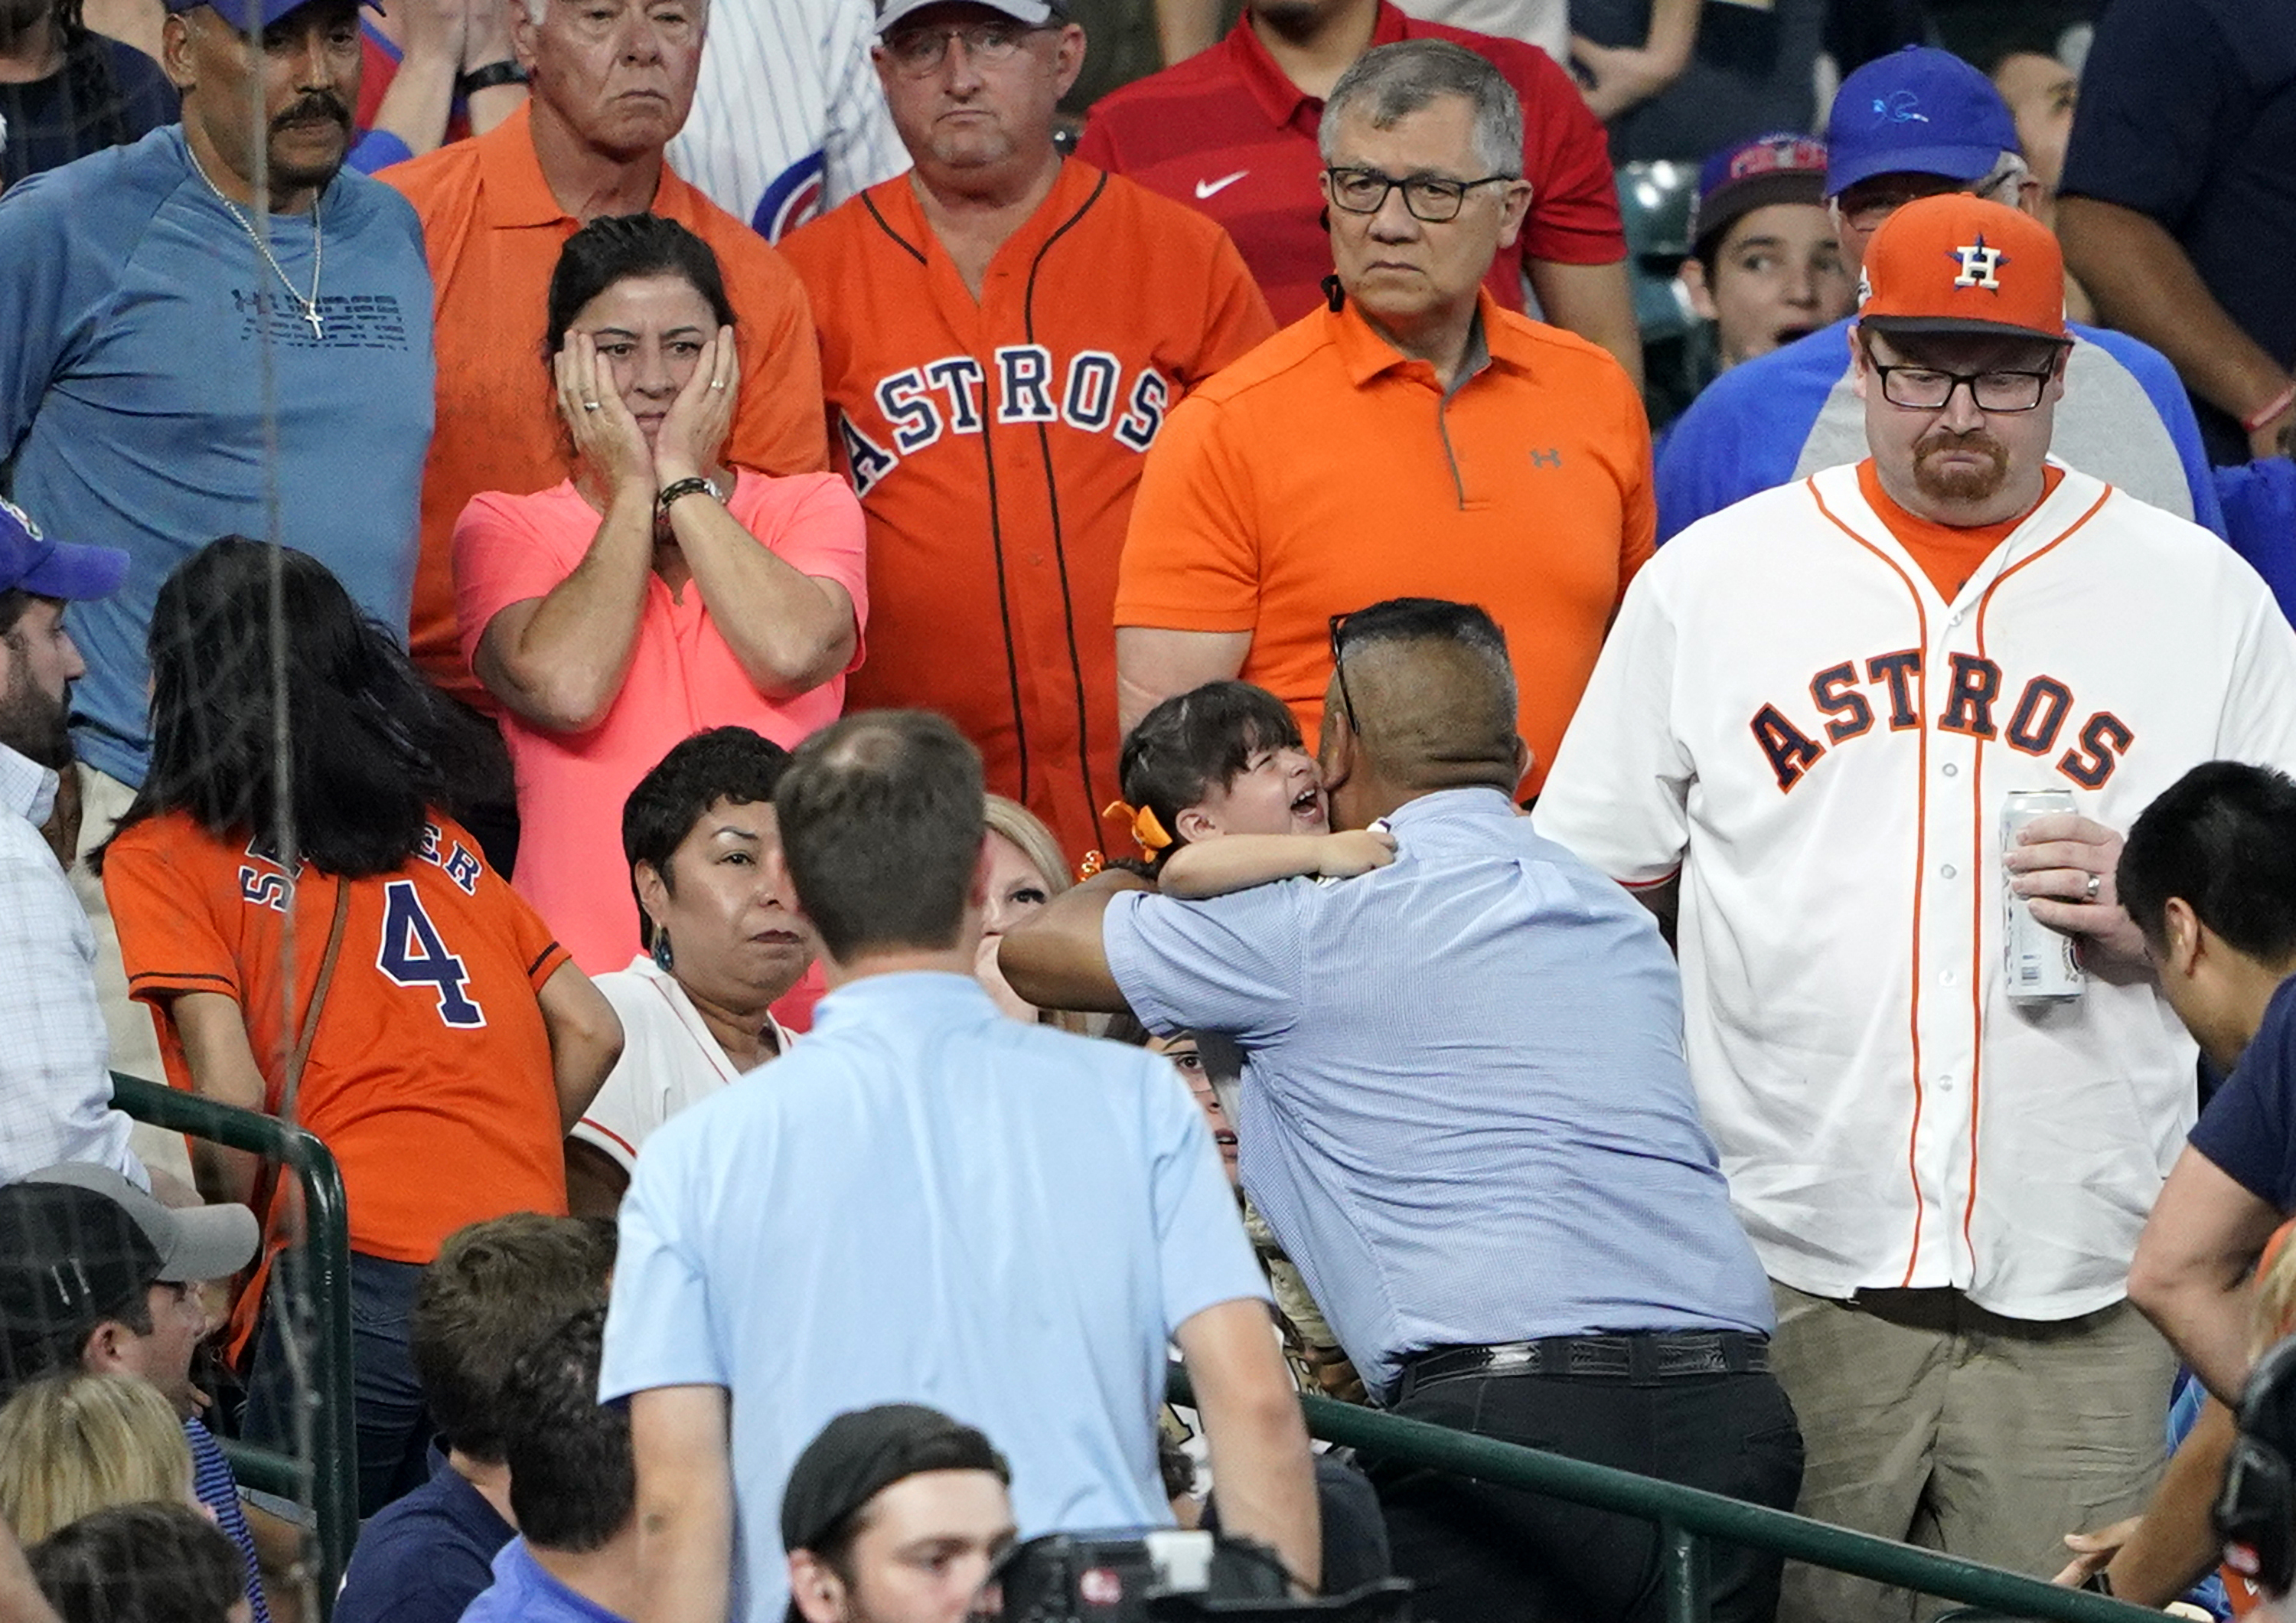 Attorney: Girl hit during Astros game had skull fracture